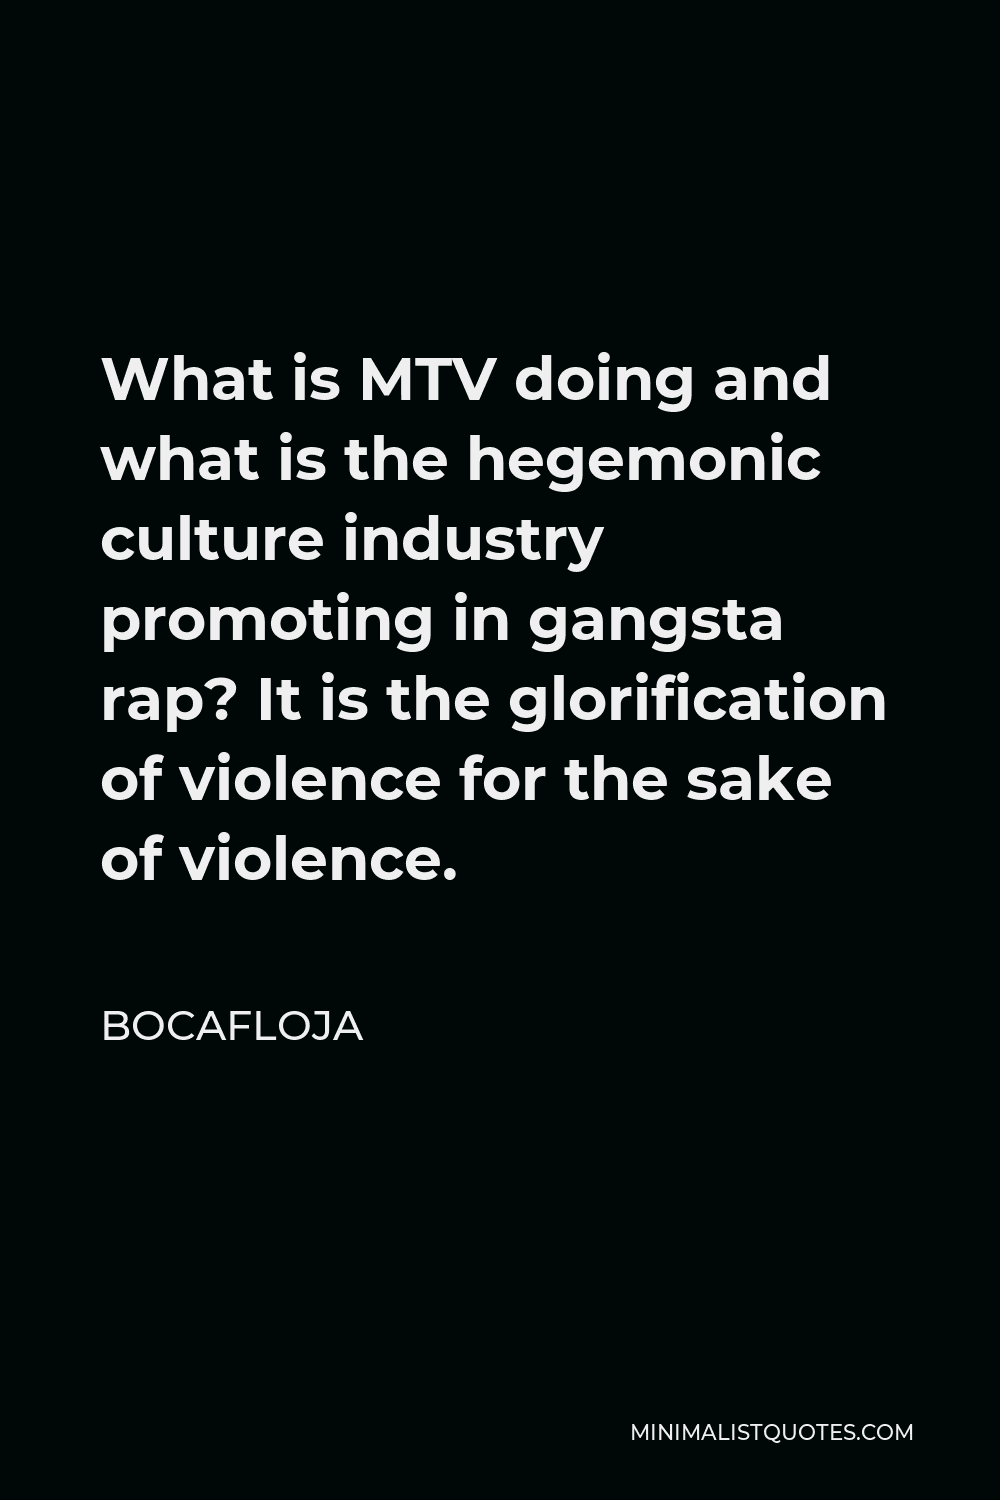 Bocafloja Quote - What is MTV doing and what is the hegemonic culture industry promoting in gangsta rap? It is the glorification of violence for the sake of violence.